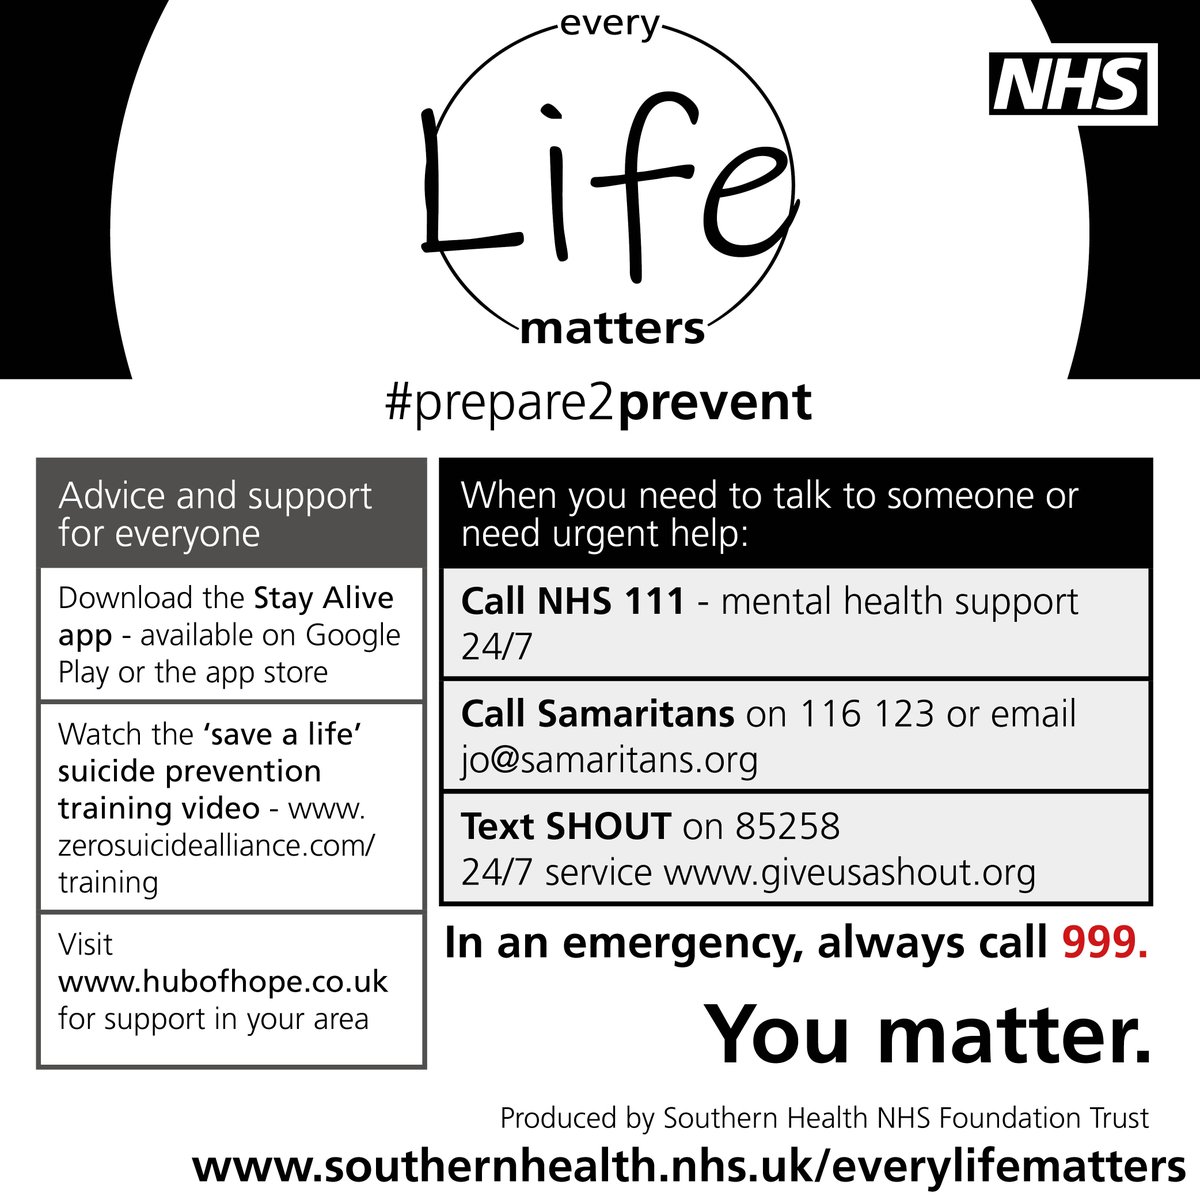 This is a time of great difficulty for so many of us across the country as we face lots of uncertainty and changes to our daily lives. Save and share this image with someone who might need it #everylifematters #prepare2prevent